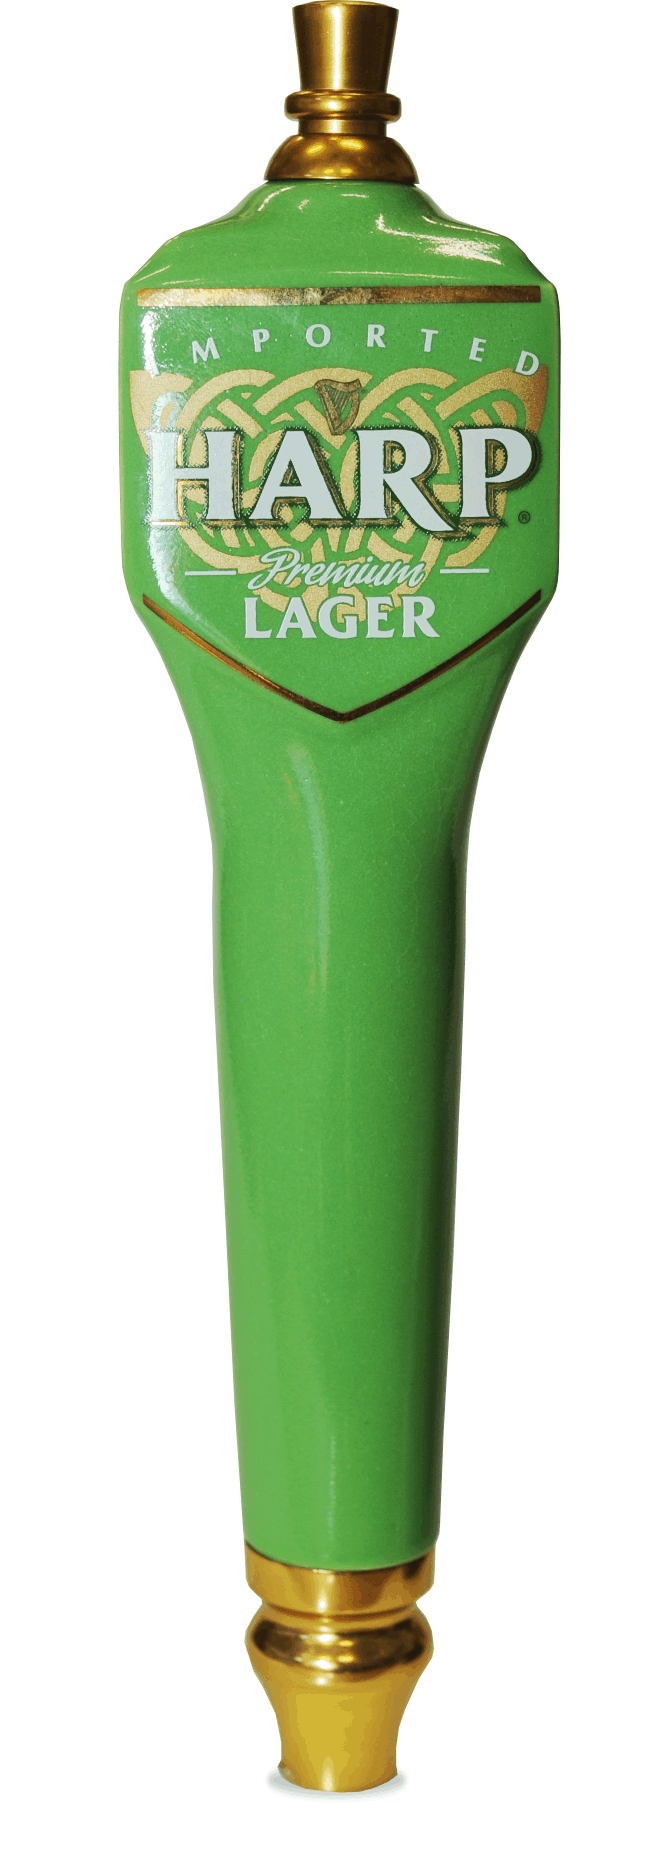 Harp Lager has a beverage tapper!